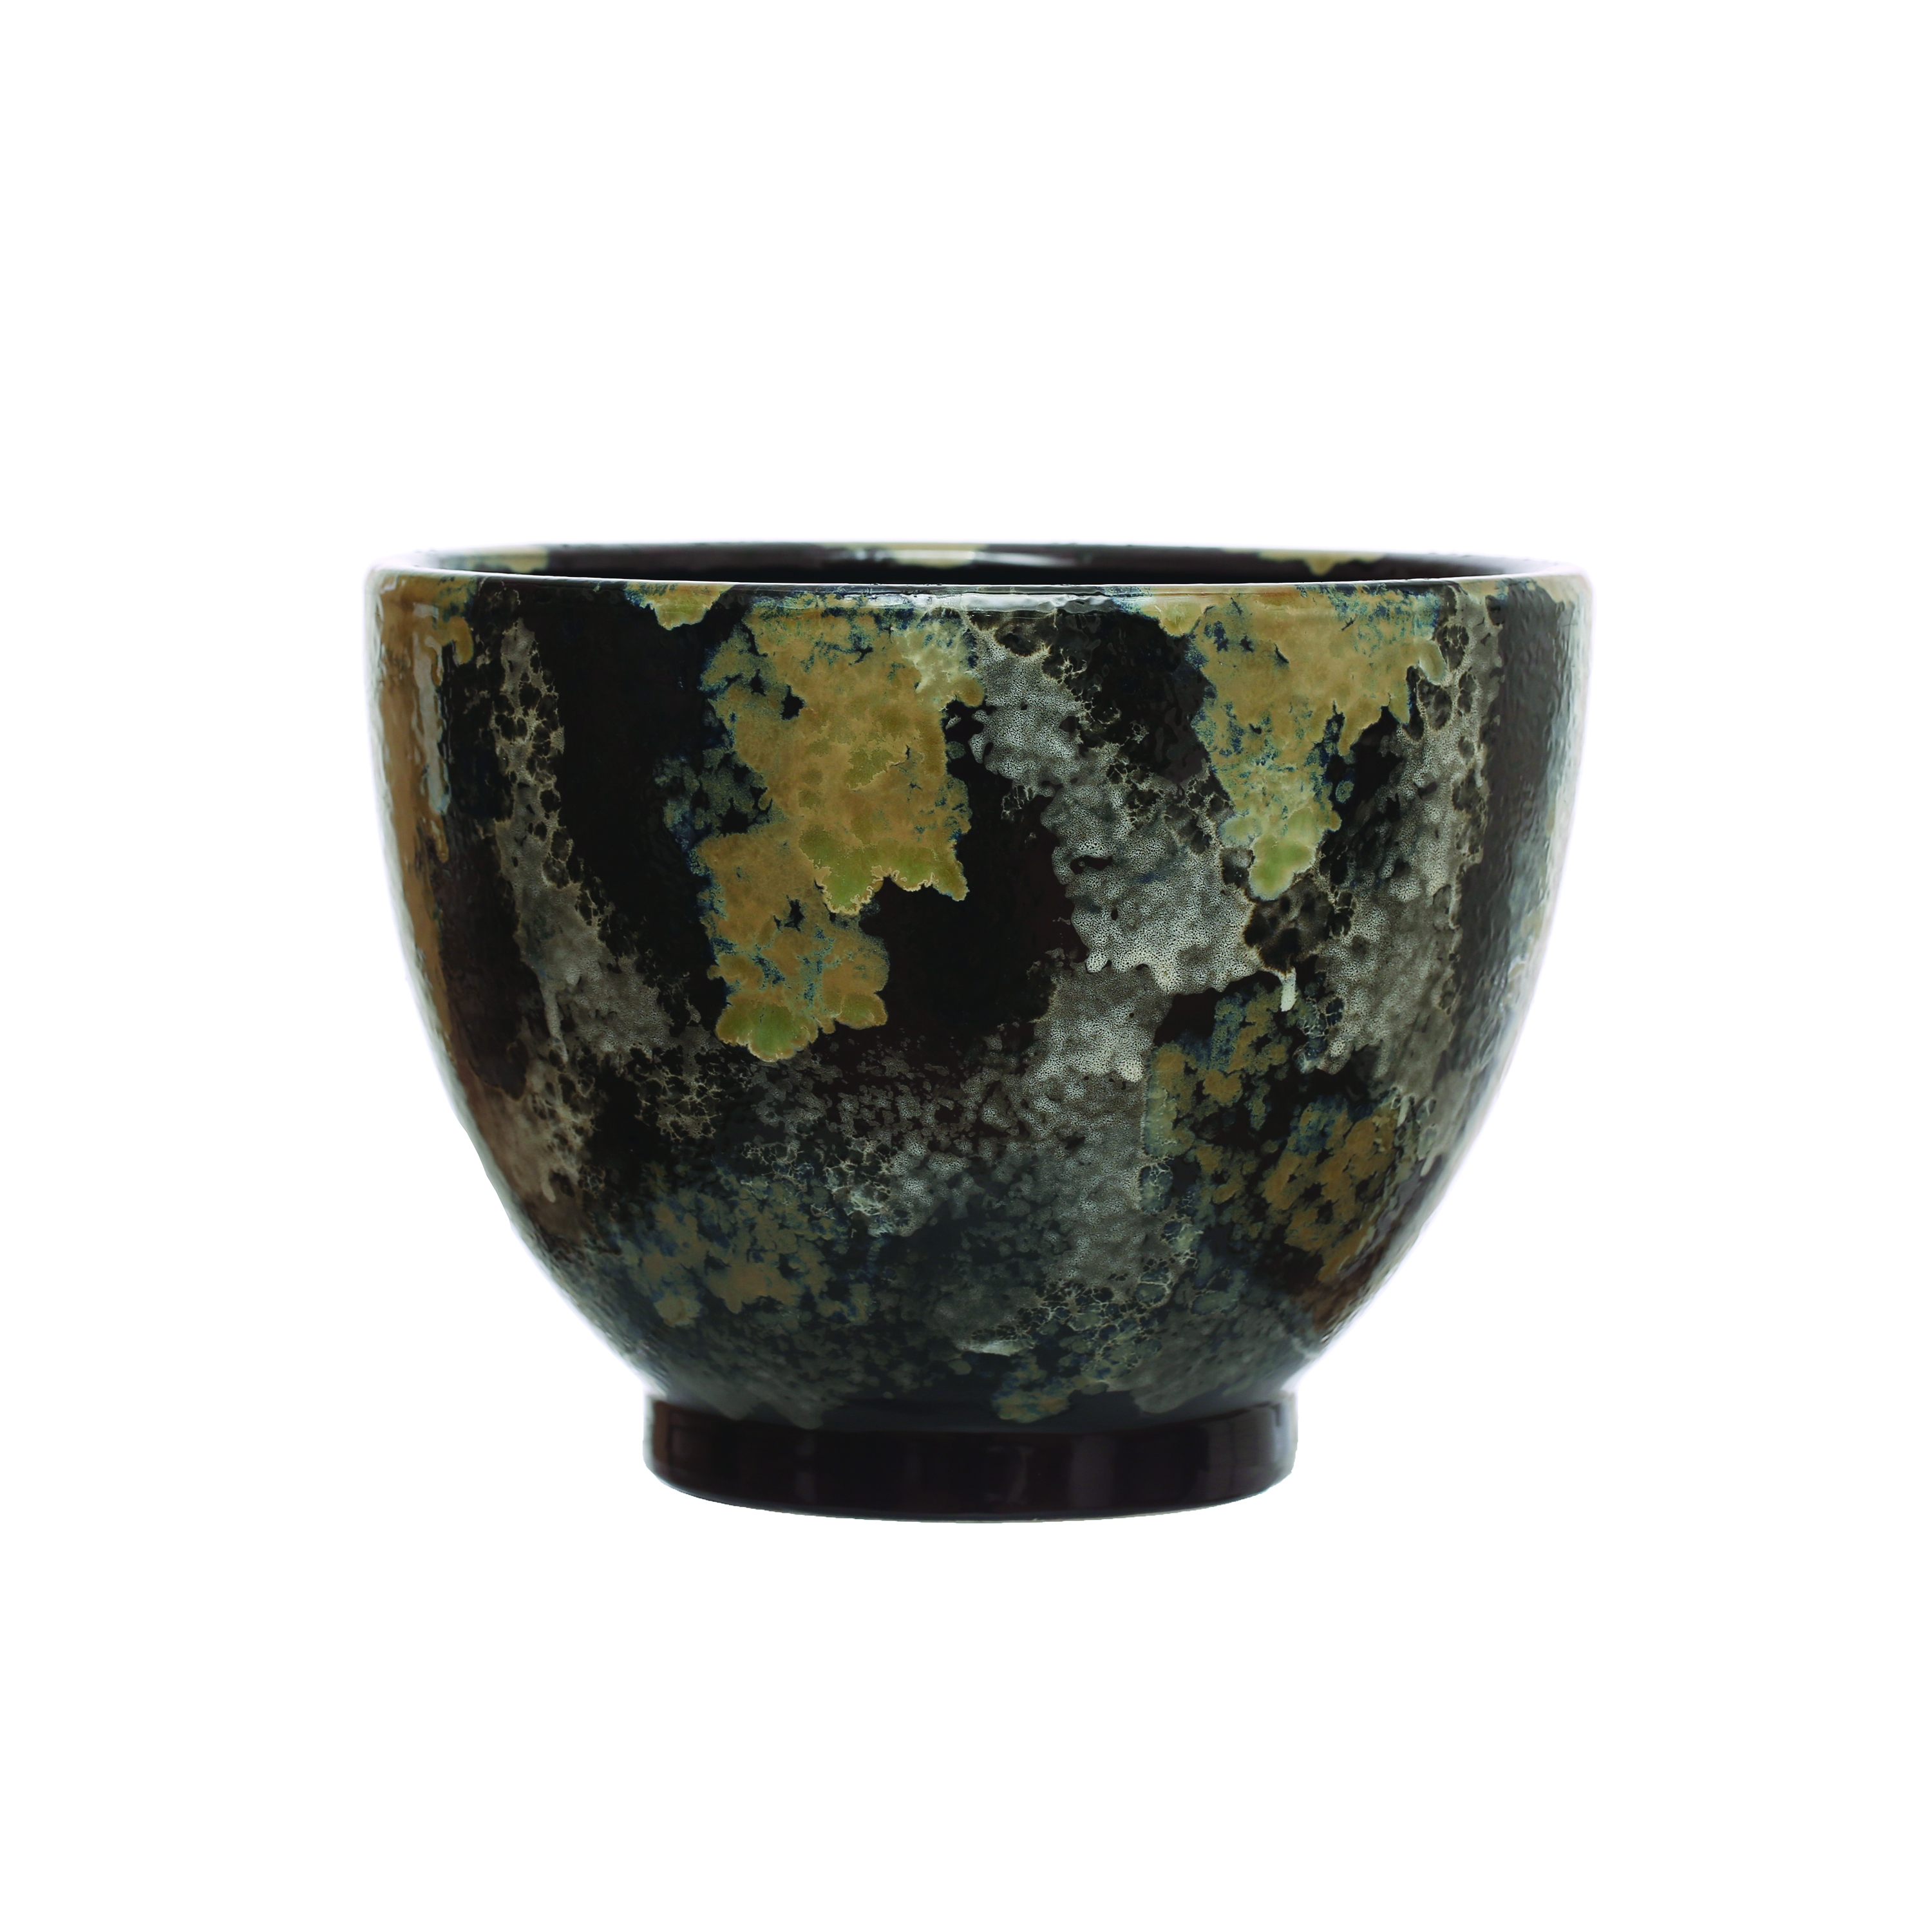 13.25 Inches Hand-Painted Stoneware Planter with Reactive Glaze, Holds 10 Inches Pot, Multicolored - Image 0